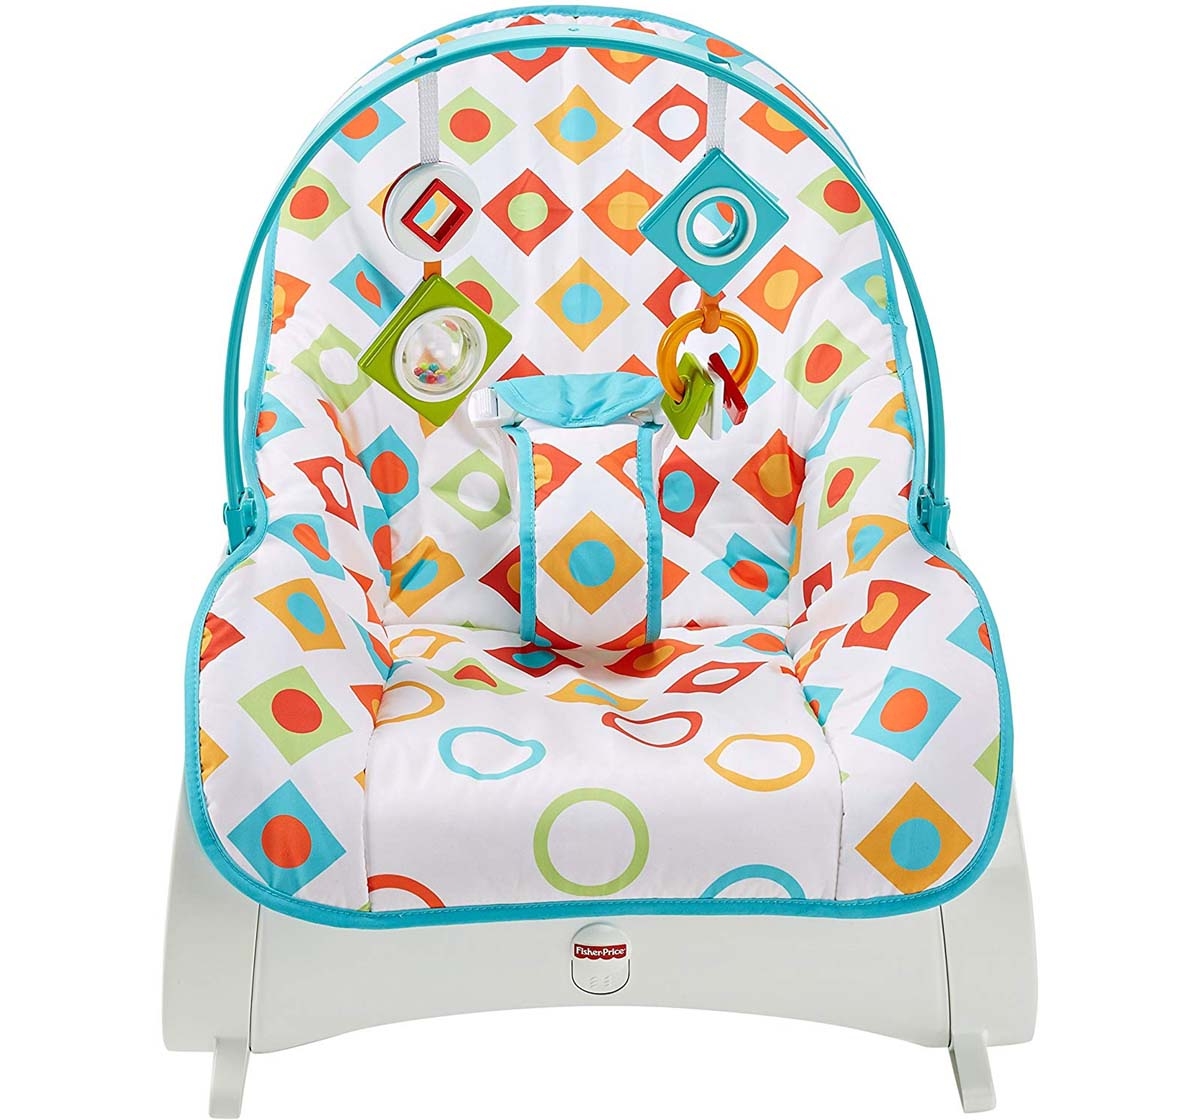 Fisher-Price | Fisher Price Infant To Toddler Rocker Geo Diamonds, Multi Color Baby Gear for Kids age 6M+ 2